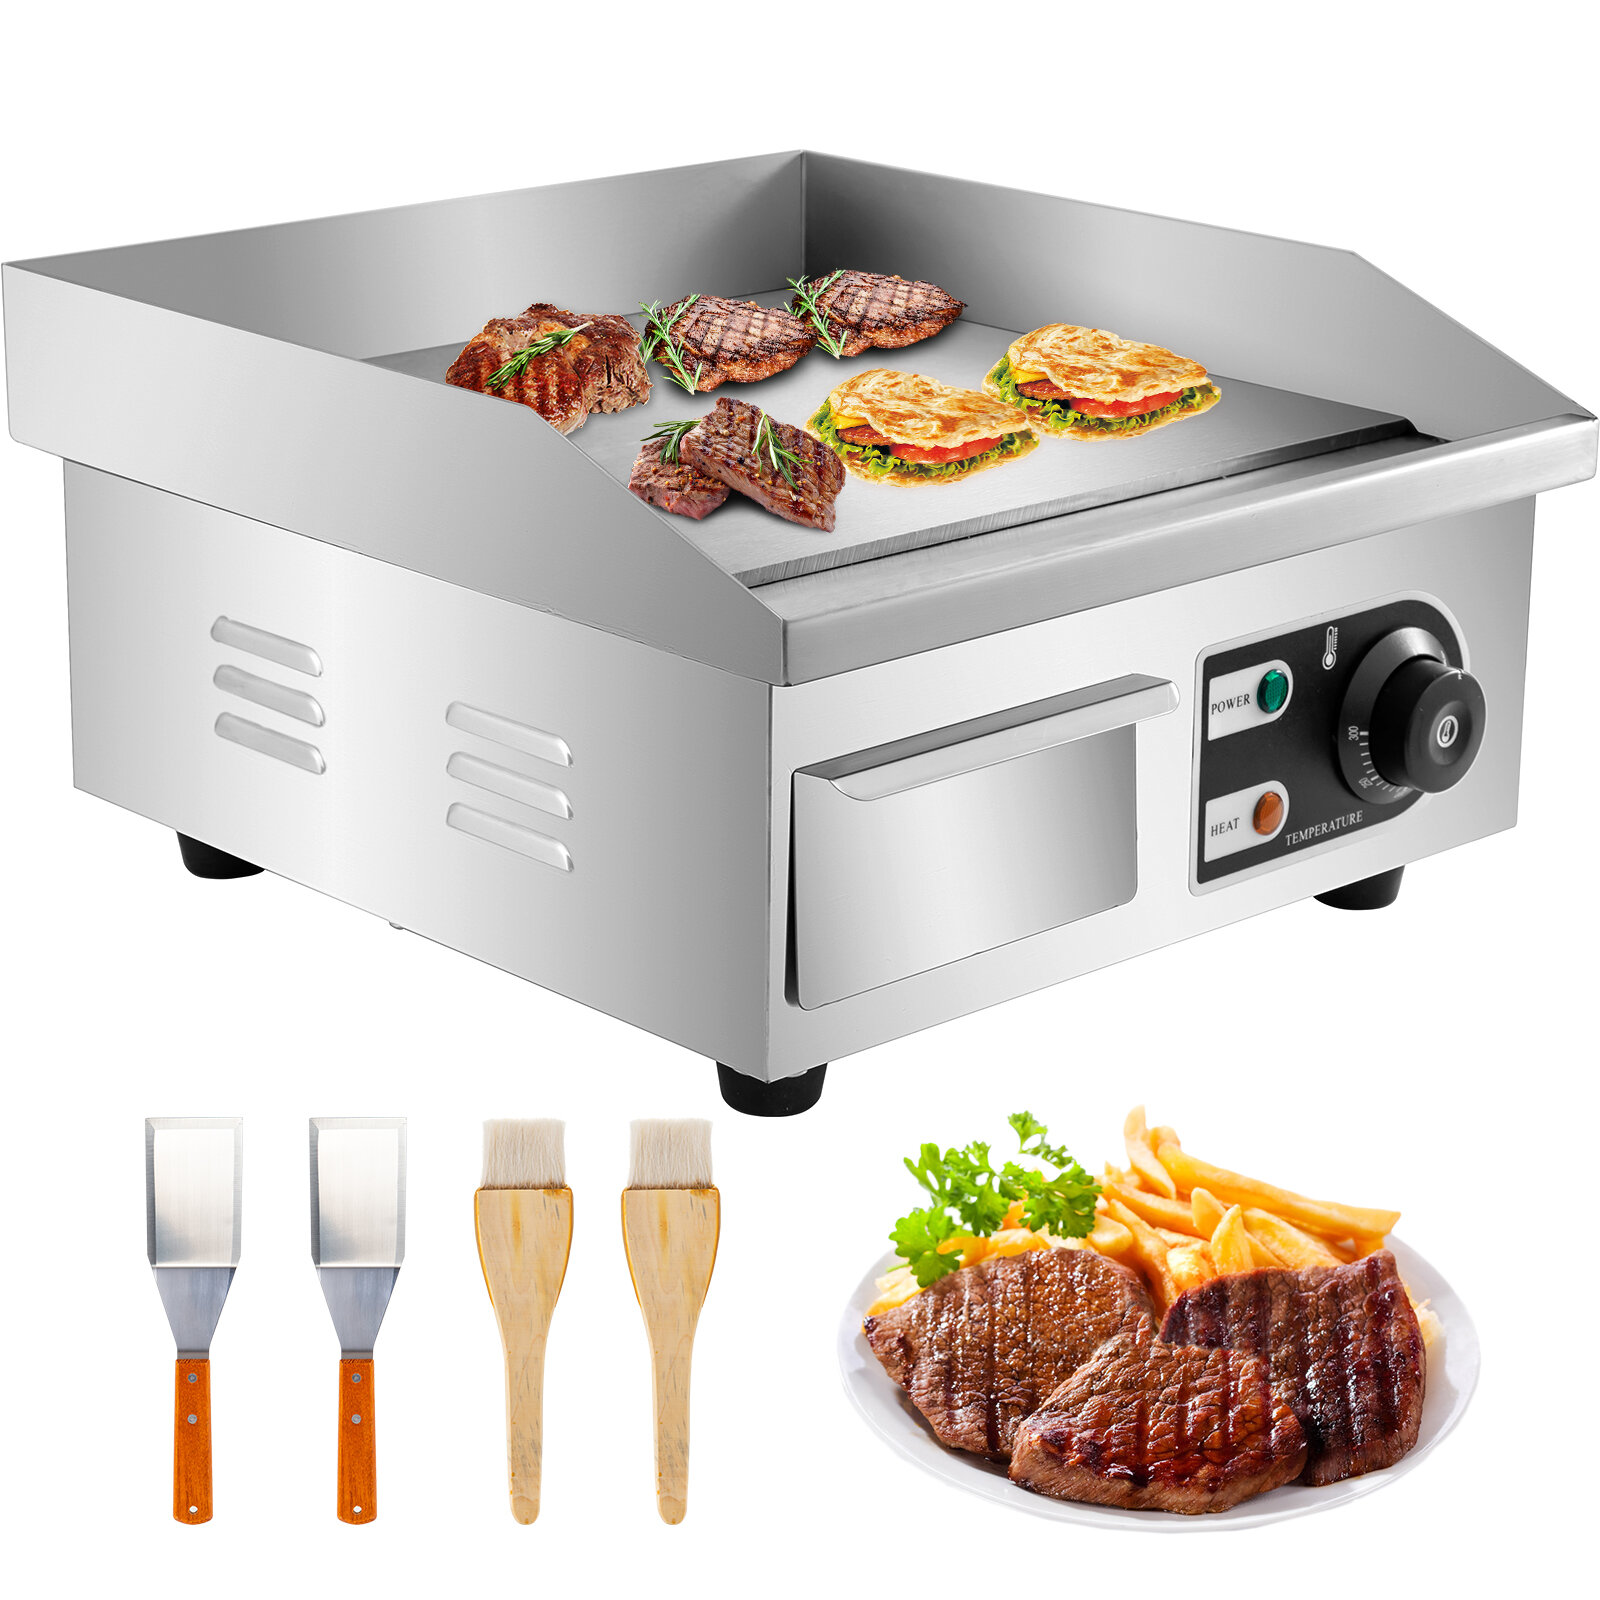 Electric Table Top Grill BBQ Barbecue Garden Camping Cooking Indoor 1300W